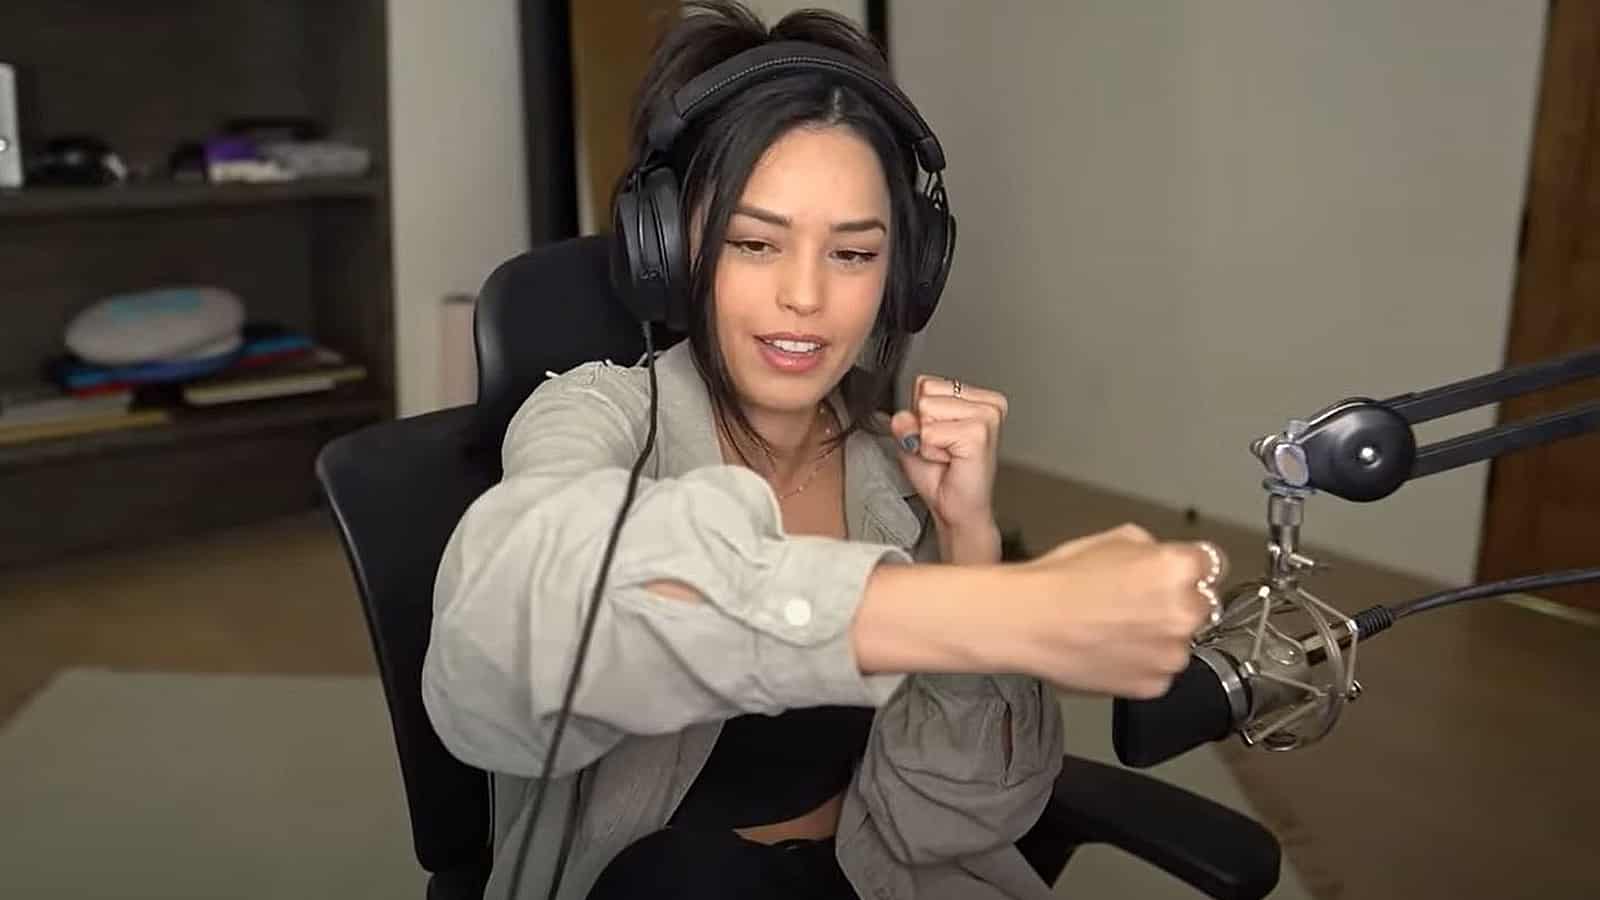 Valkyrae reveals she's already been asked to fight in influencer boxing events - Dexerto